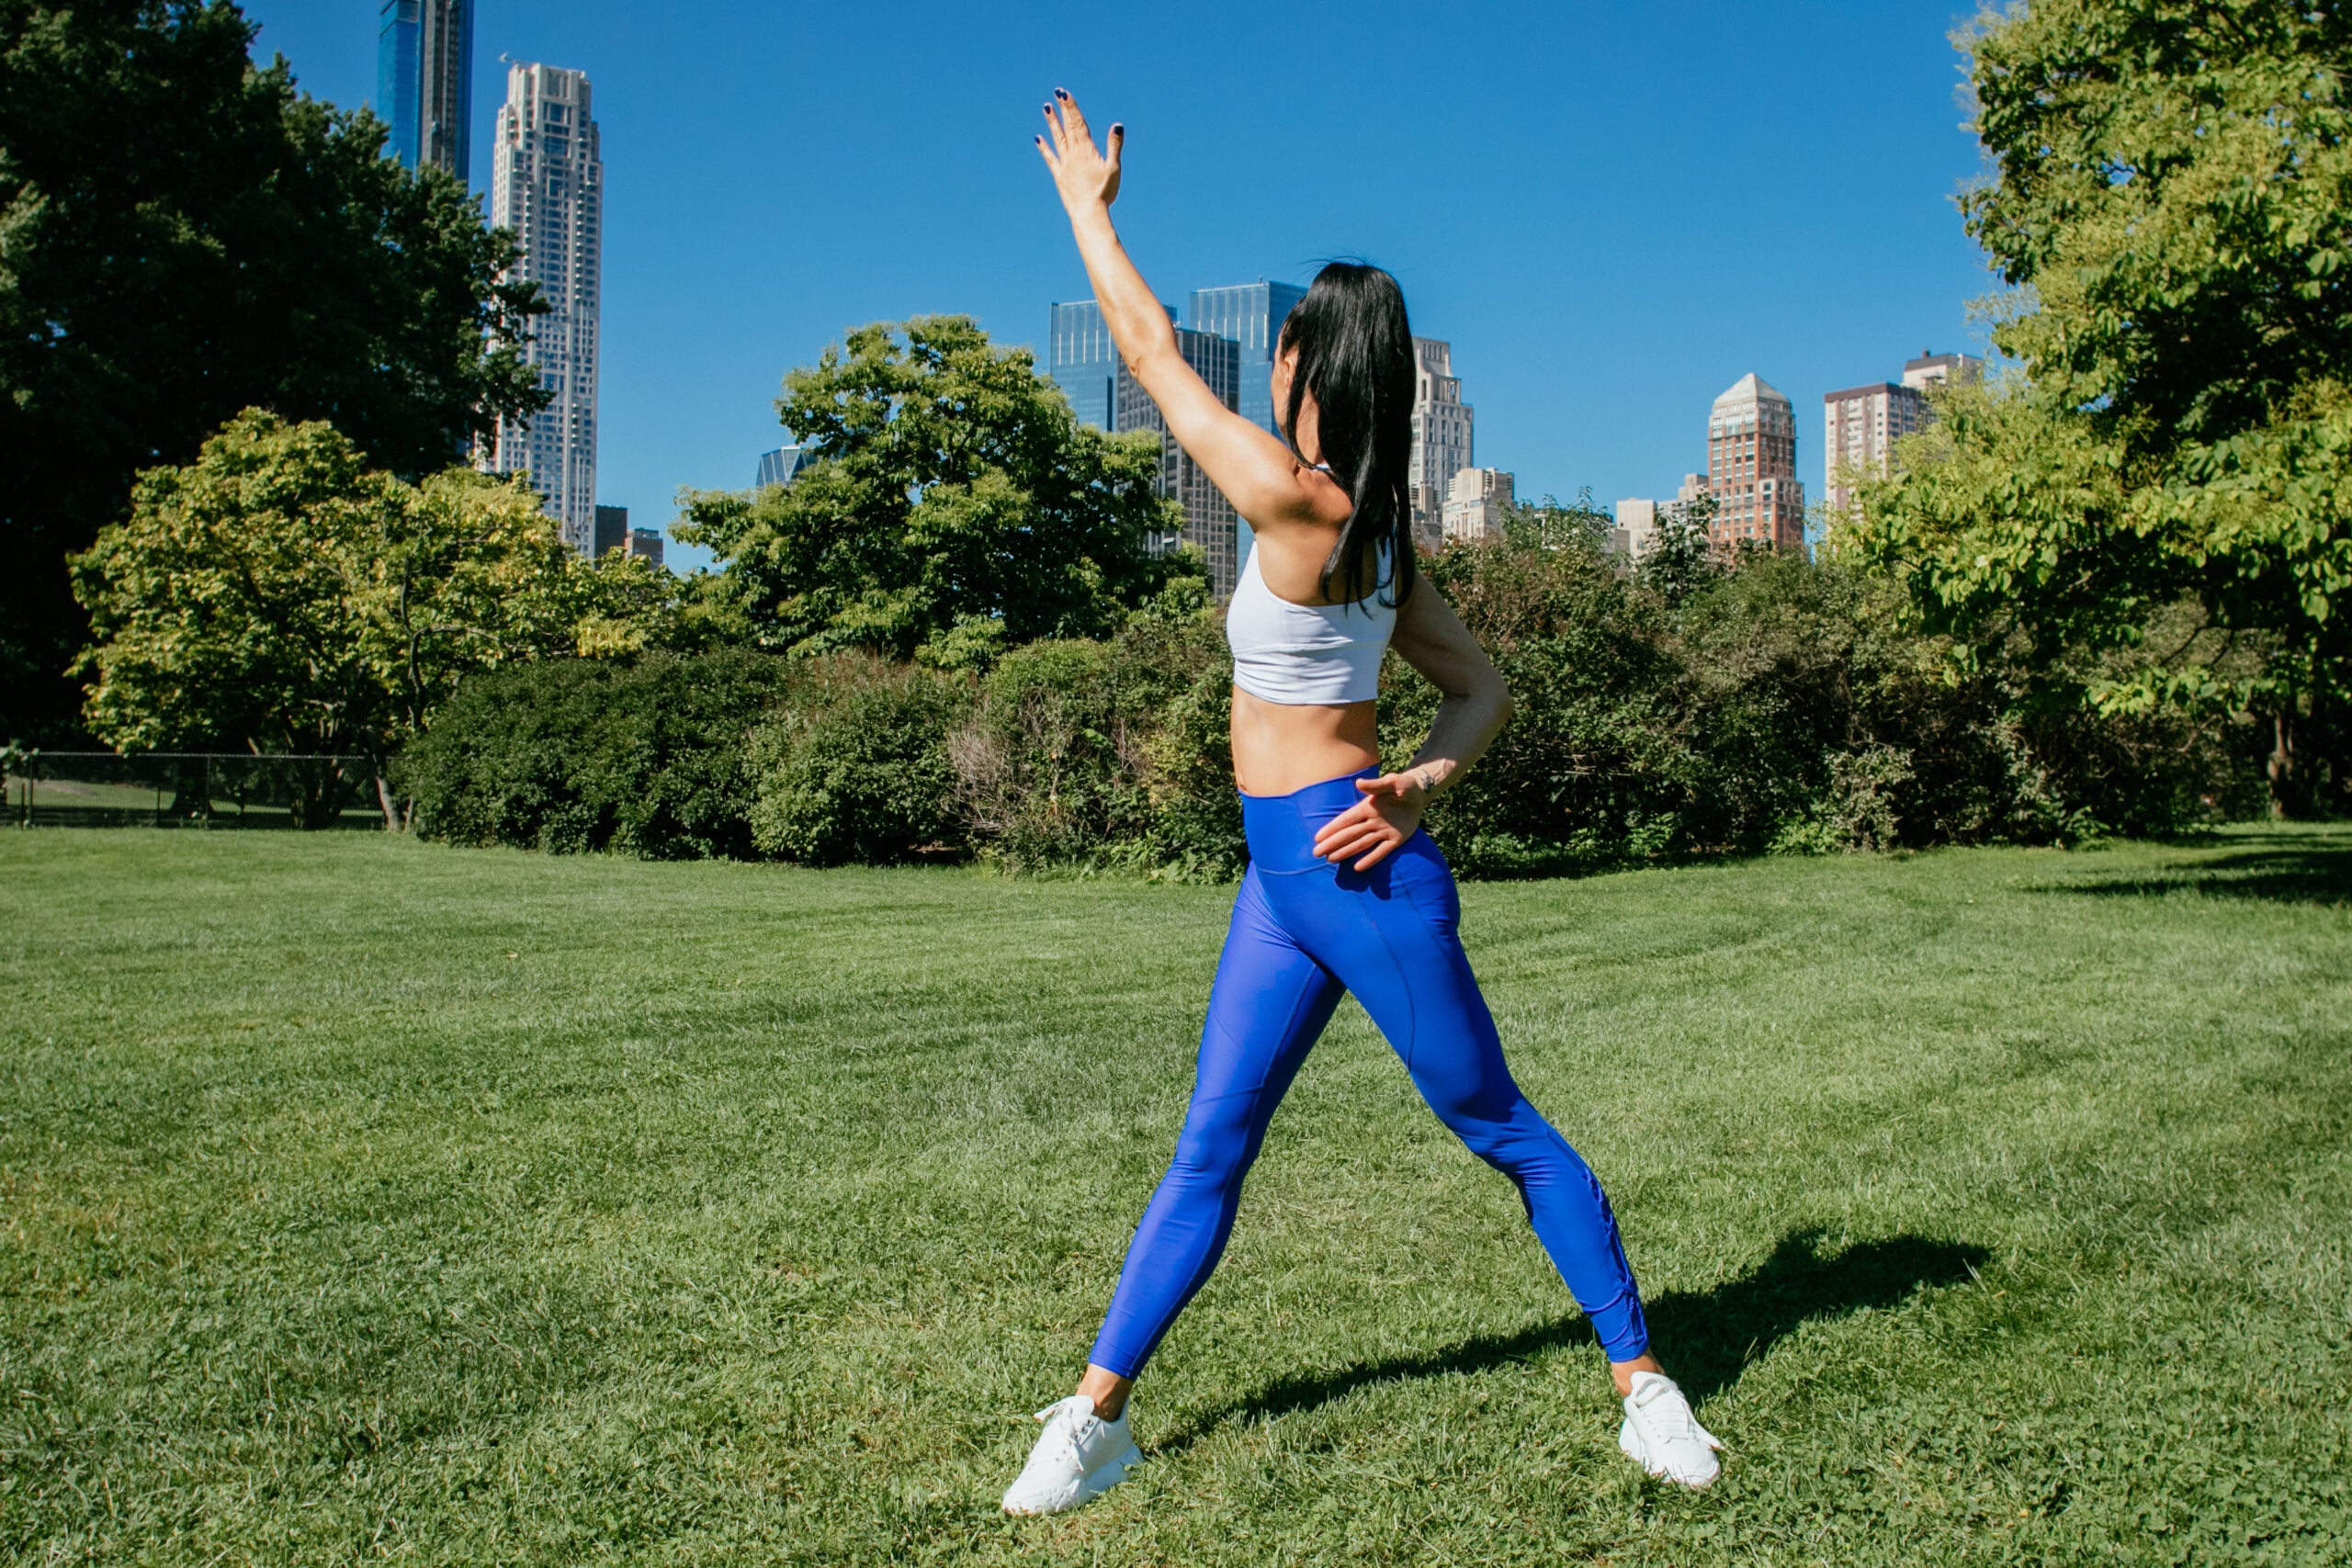 These 5 simple stretches will improve your flexibility and help